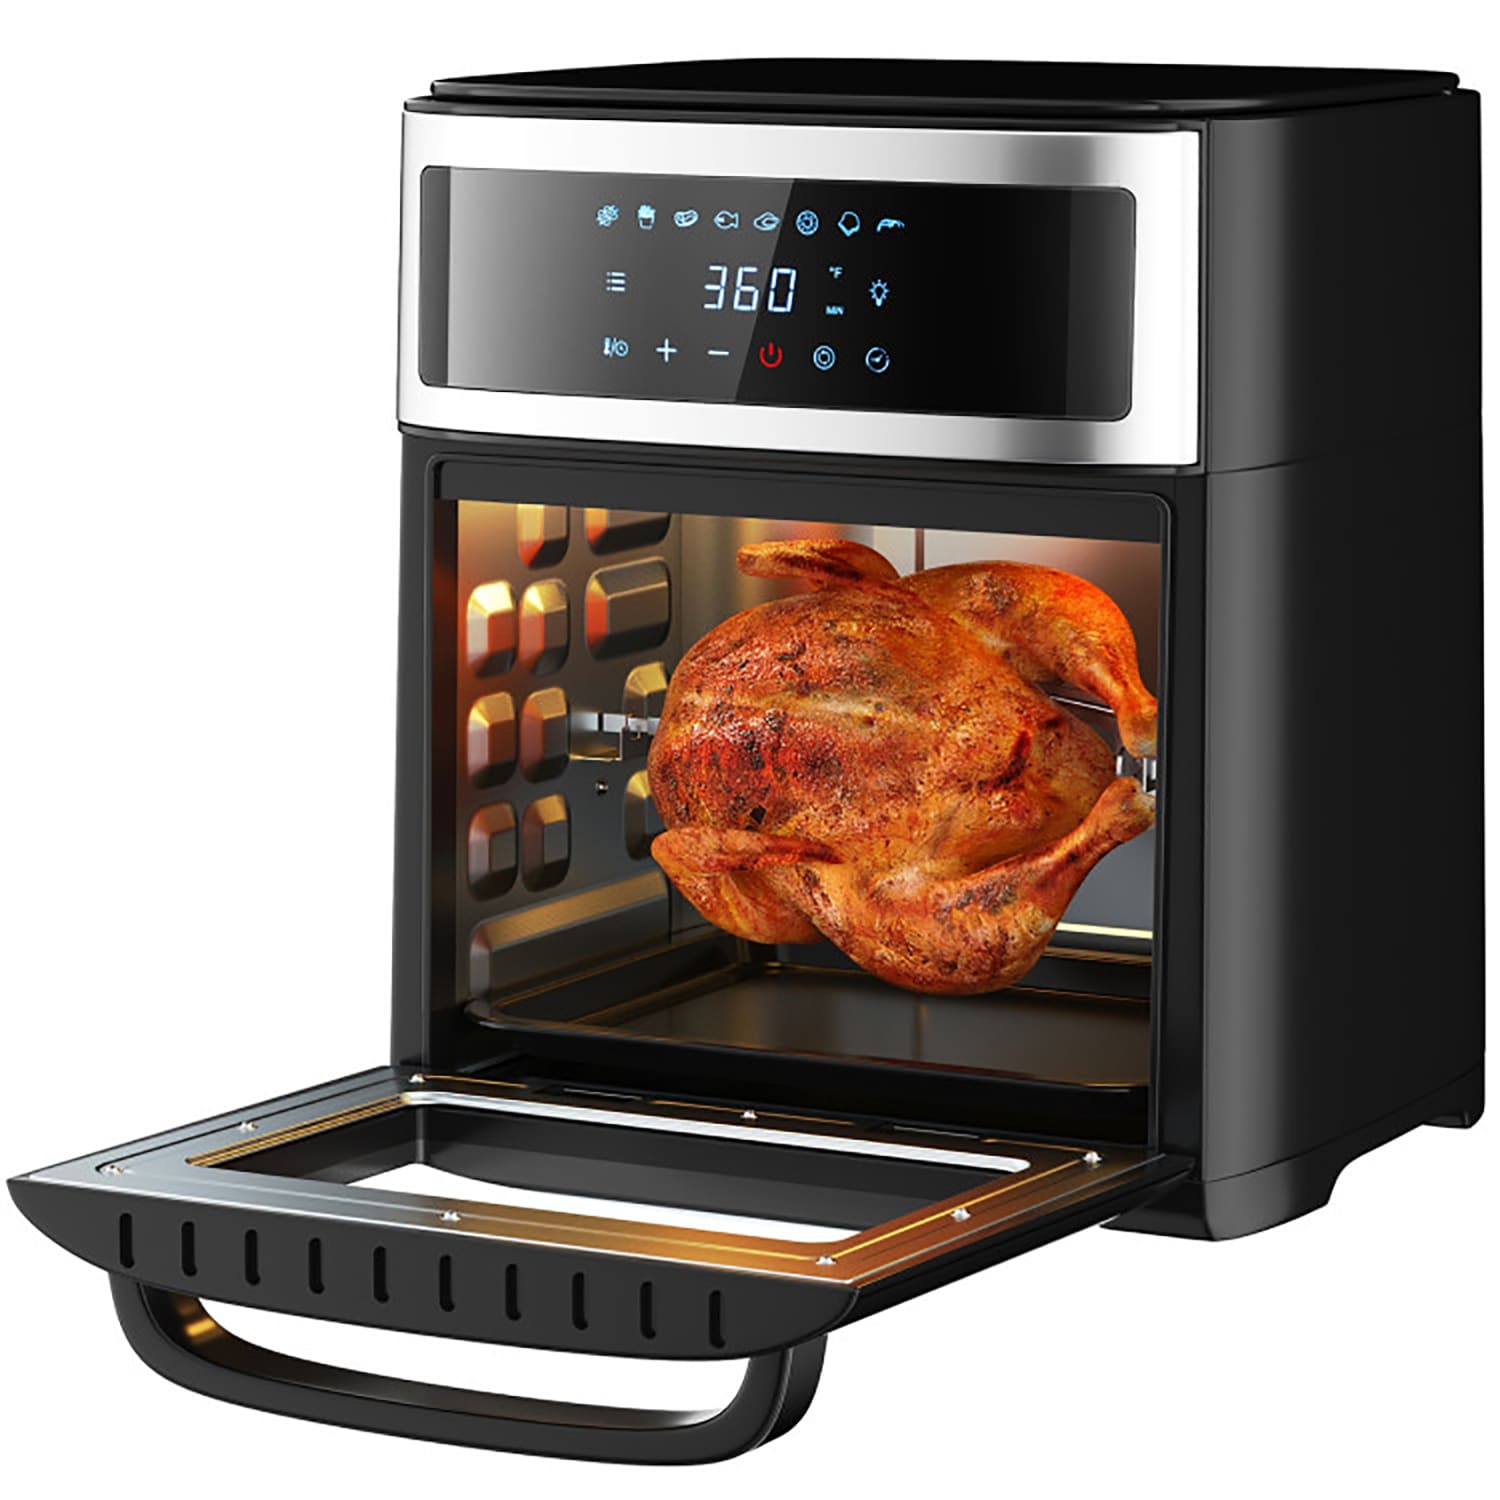  Air Fryer, 12 L (12.7 qt) Air fryer Oven with Rotisserie  Function, 10 in 1 Electric Hot Oven with 8 Cooking Accessories and Recipe,  1700W Air Fryer Toaster Oven with 9